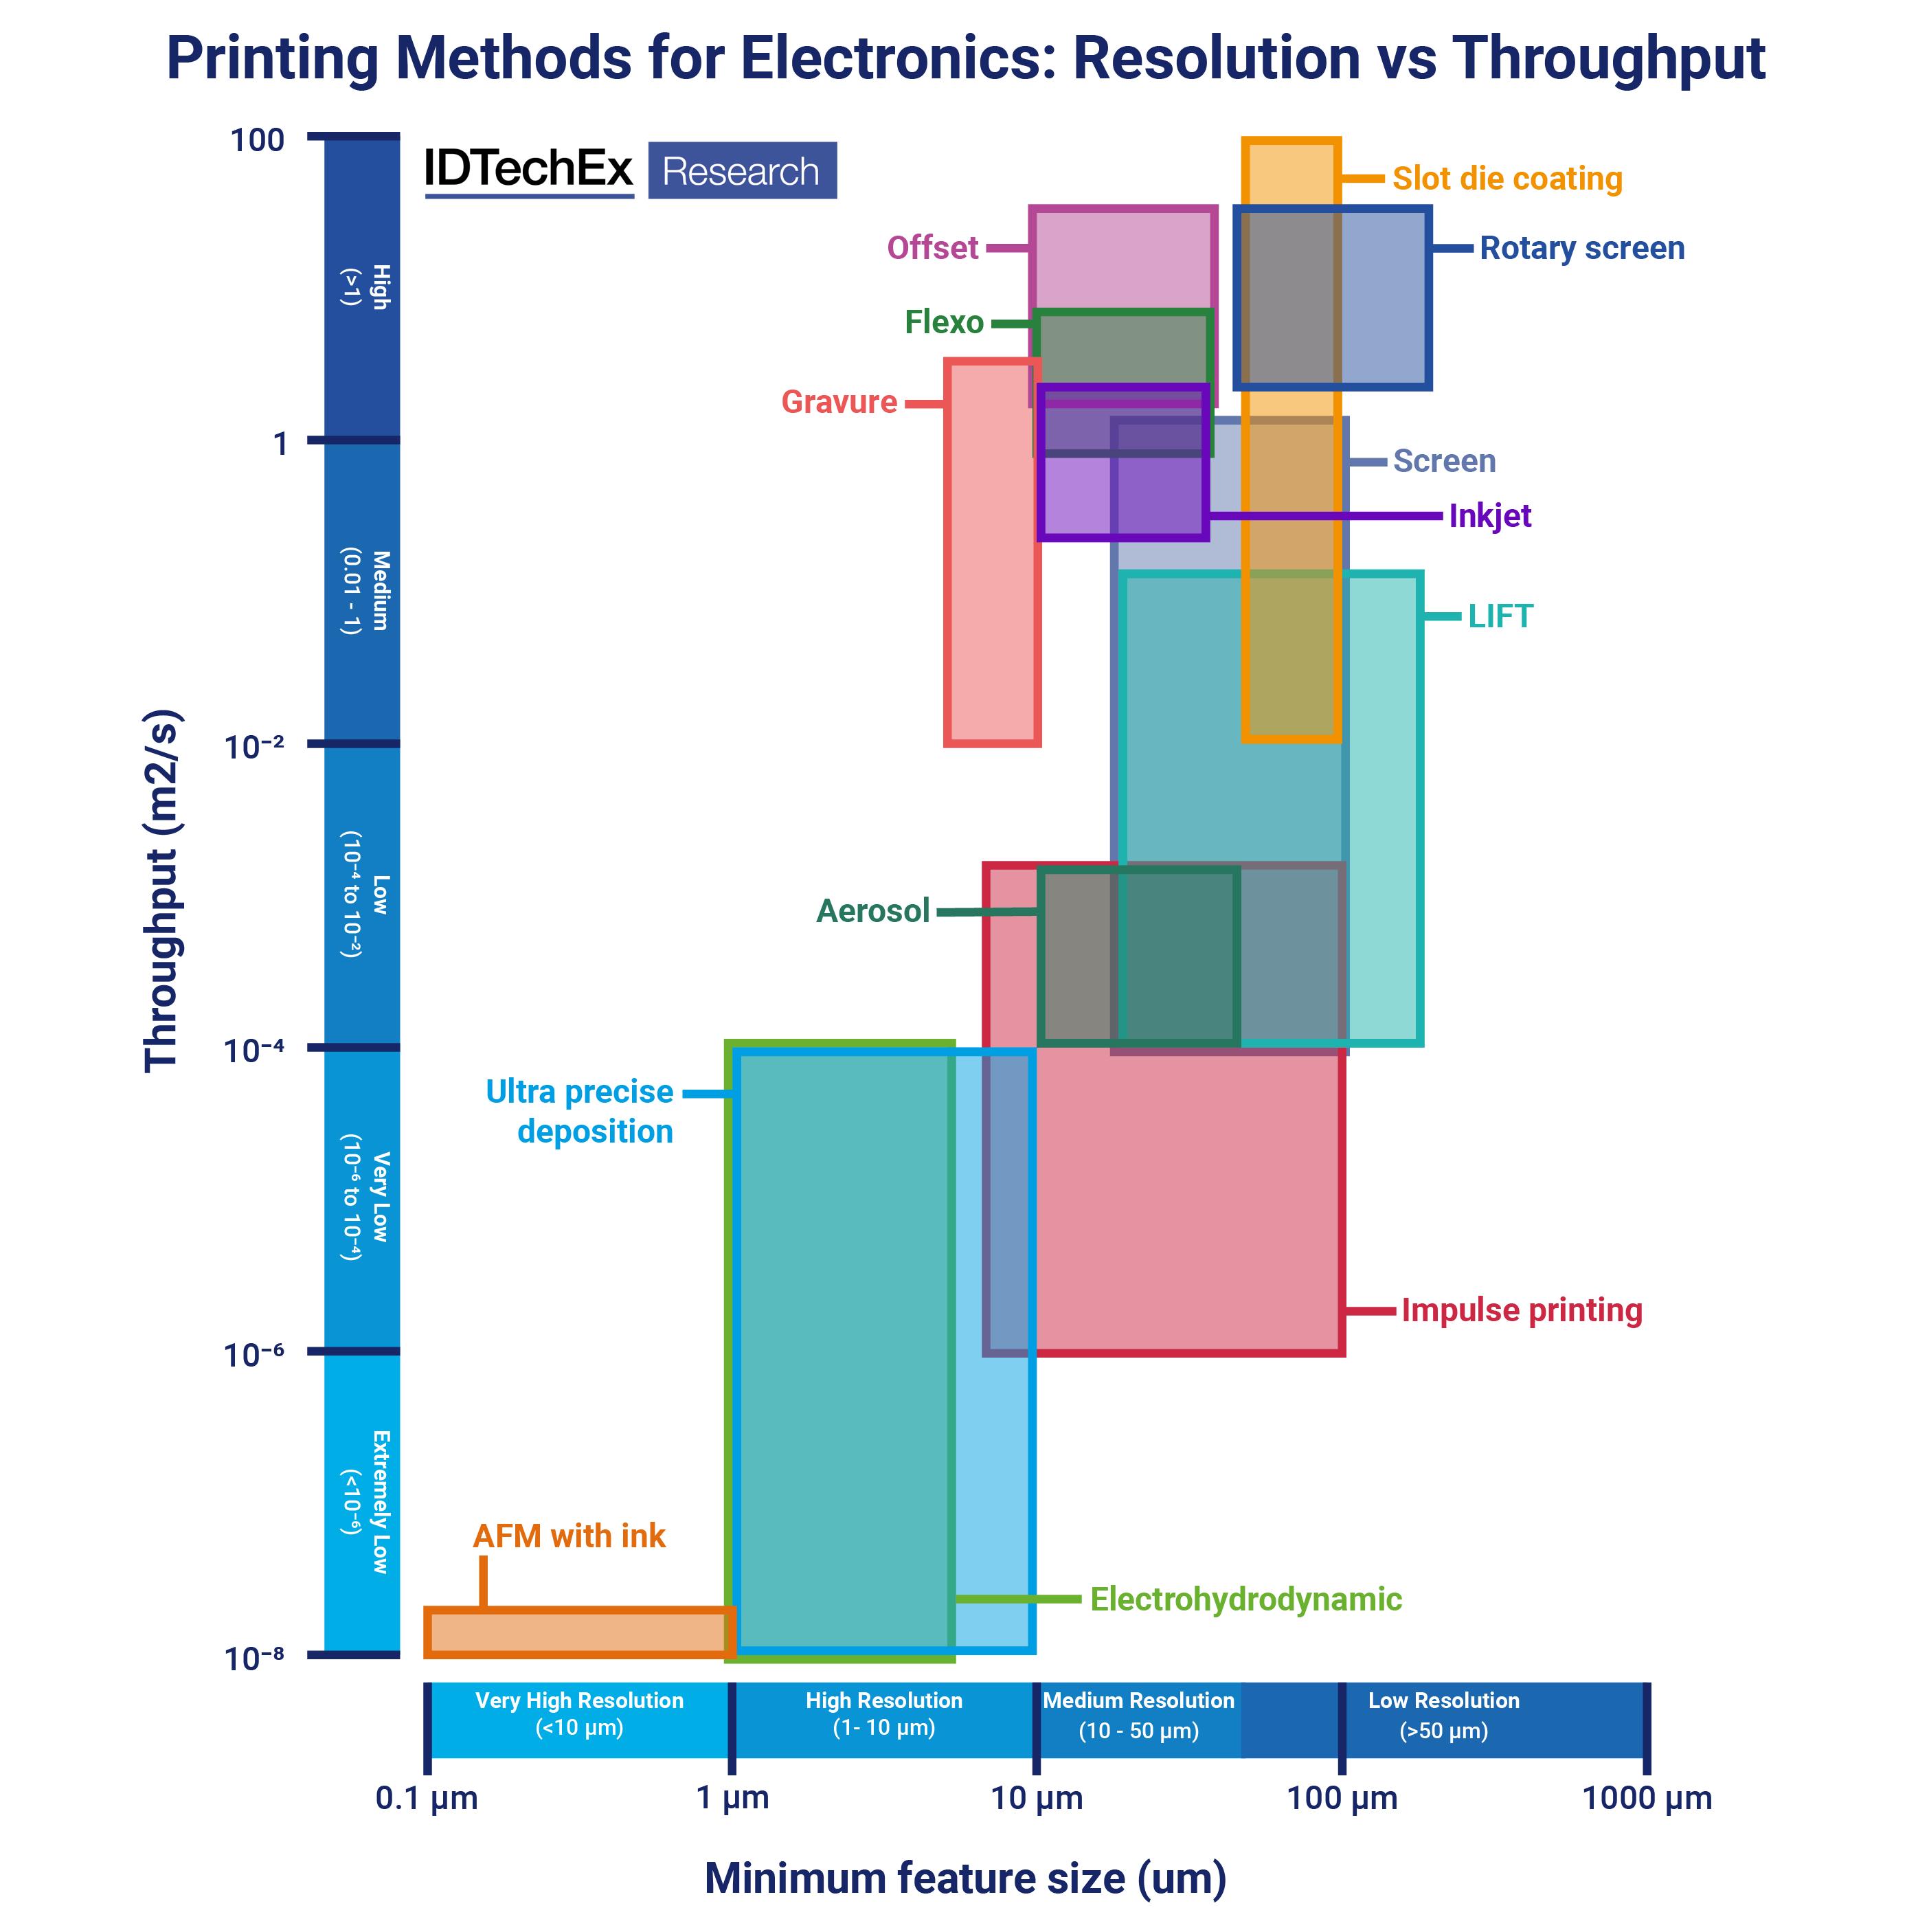 Throughput and minimum feature size for competing printed electronics manufacturing methods. Source: IDTechEx 